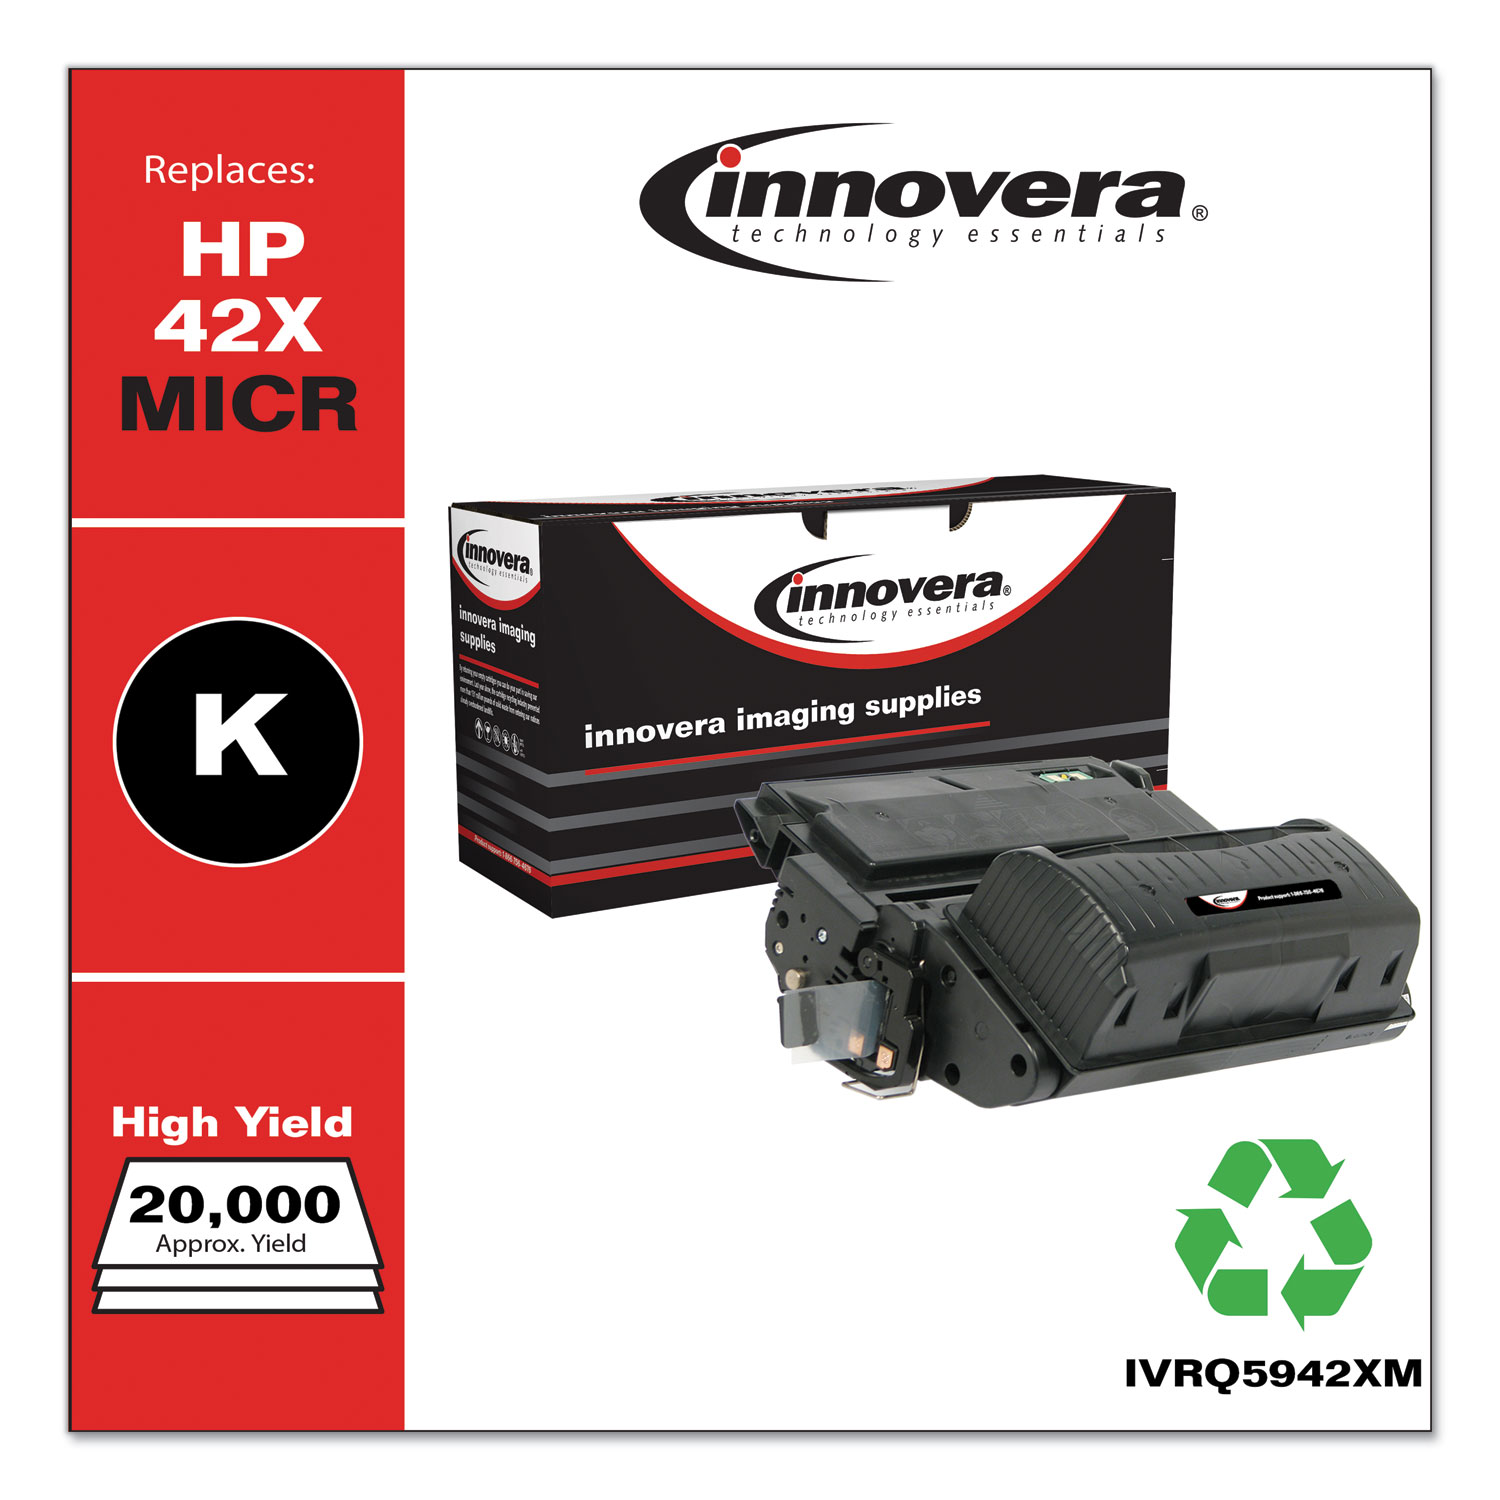  Innovera IVRQ5942XM Remanufactured Black High-Yield MICR Toner, Replacement for HP 42XM (Q5942XM), 20,000 Page-Yield (IVRQ5942XM) 